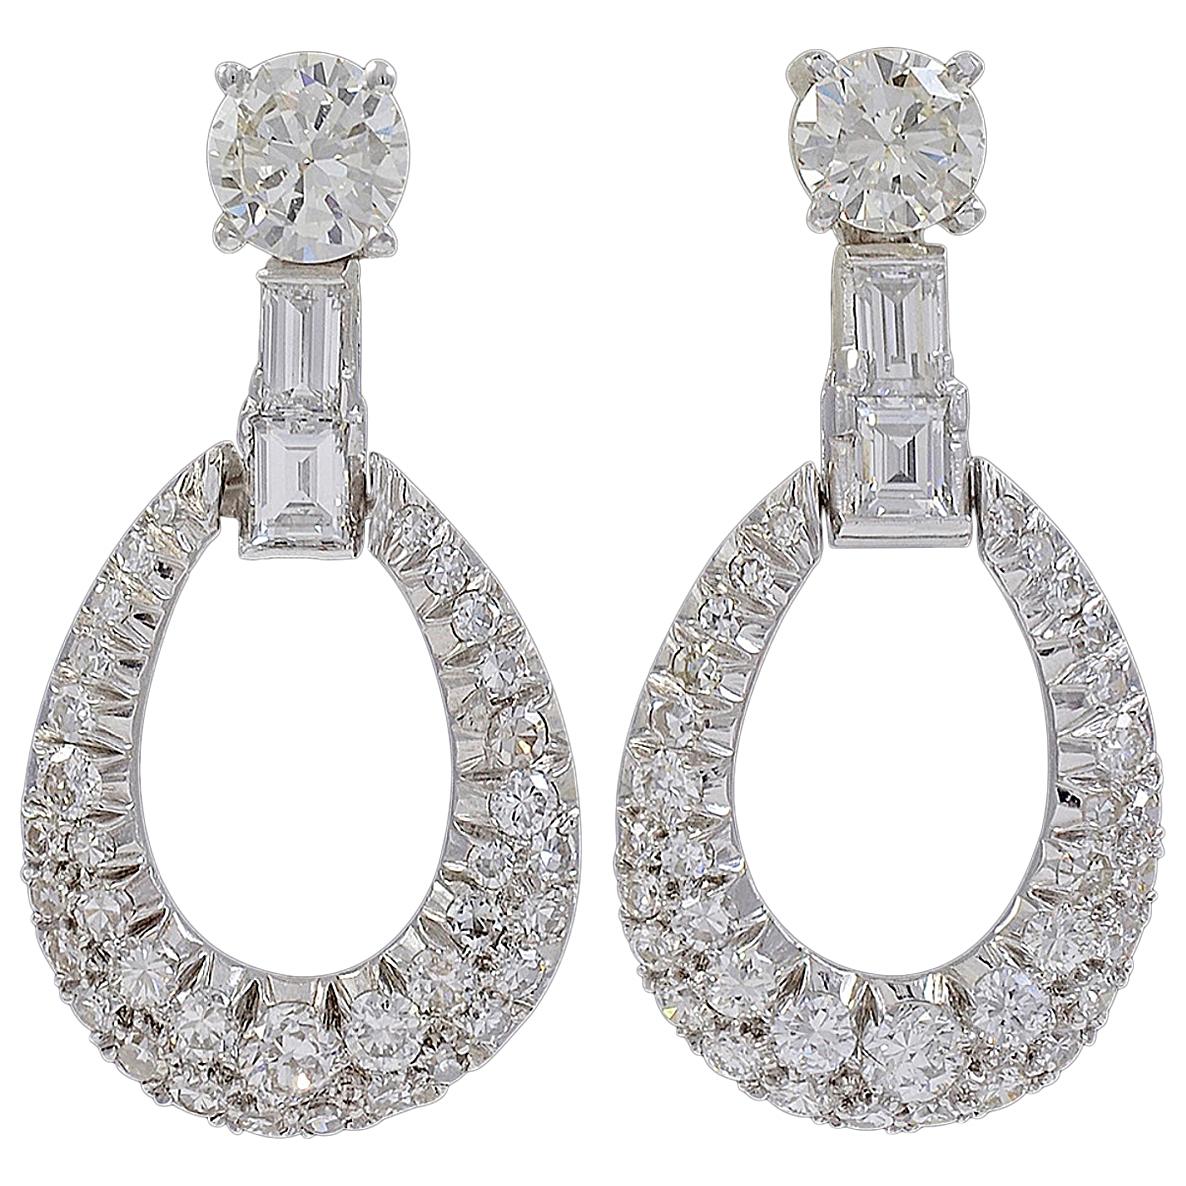 1950s 7 Ct Diamond Drop Cocktail Earrings Platinum with 2 Ct Solitaire Diamond For Sale